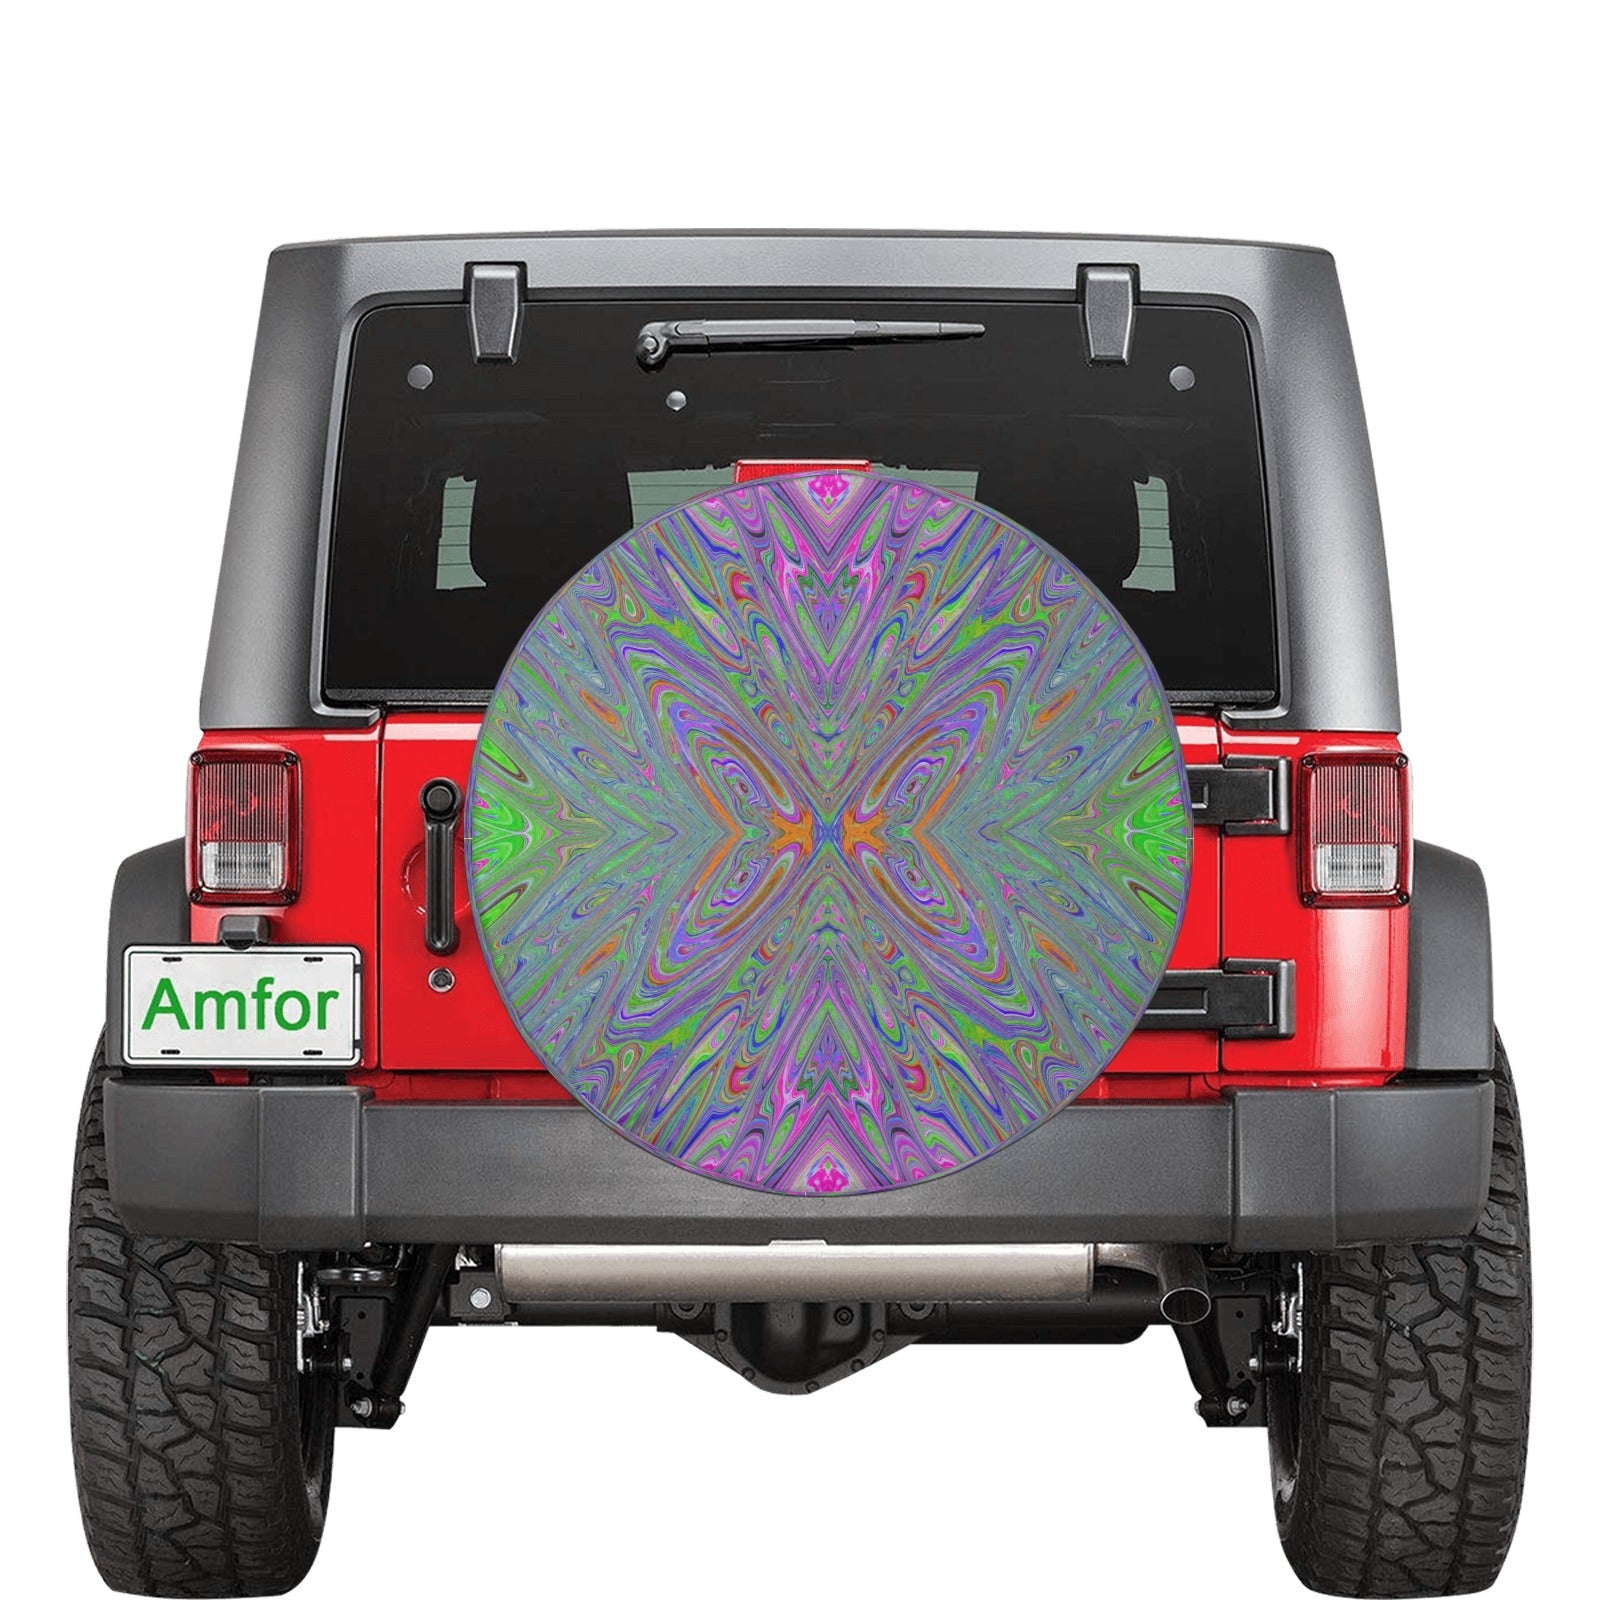 Spare Tire Covers, Abstract Trippy Purple, Orange and Lime Green Butterfly - Large